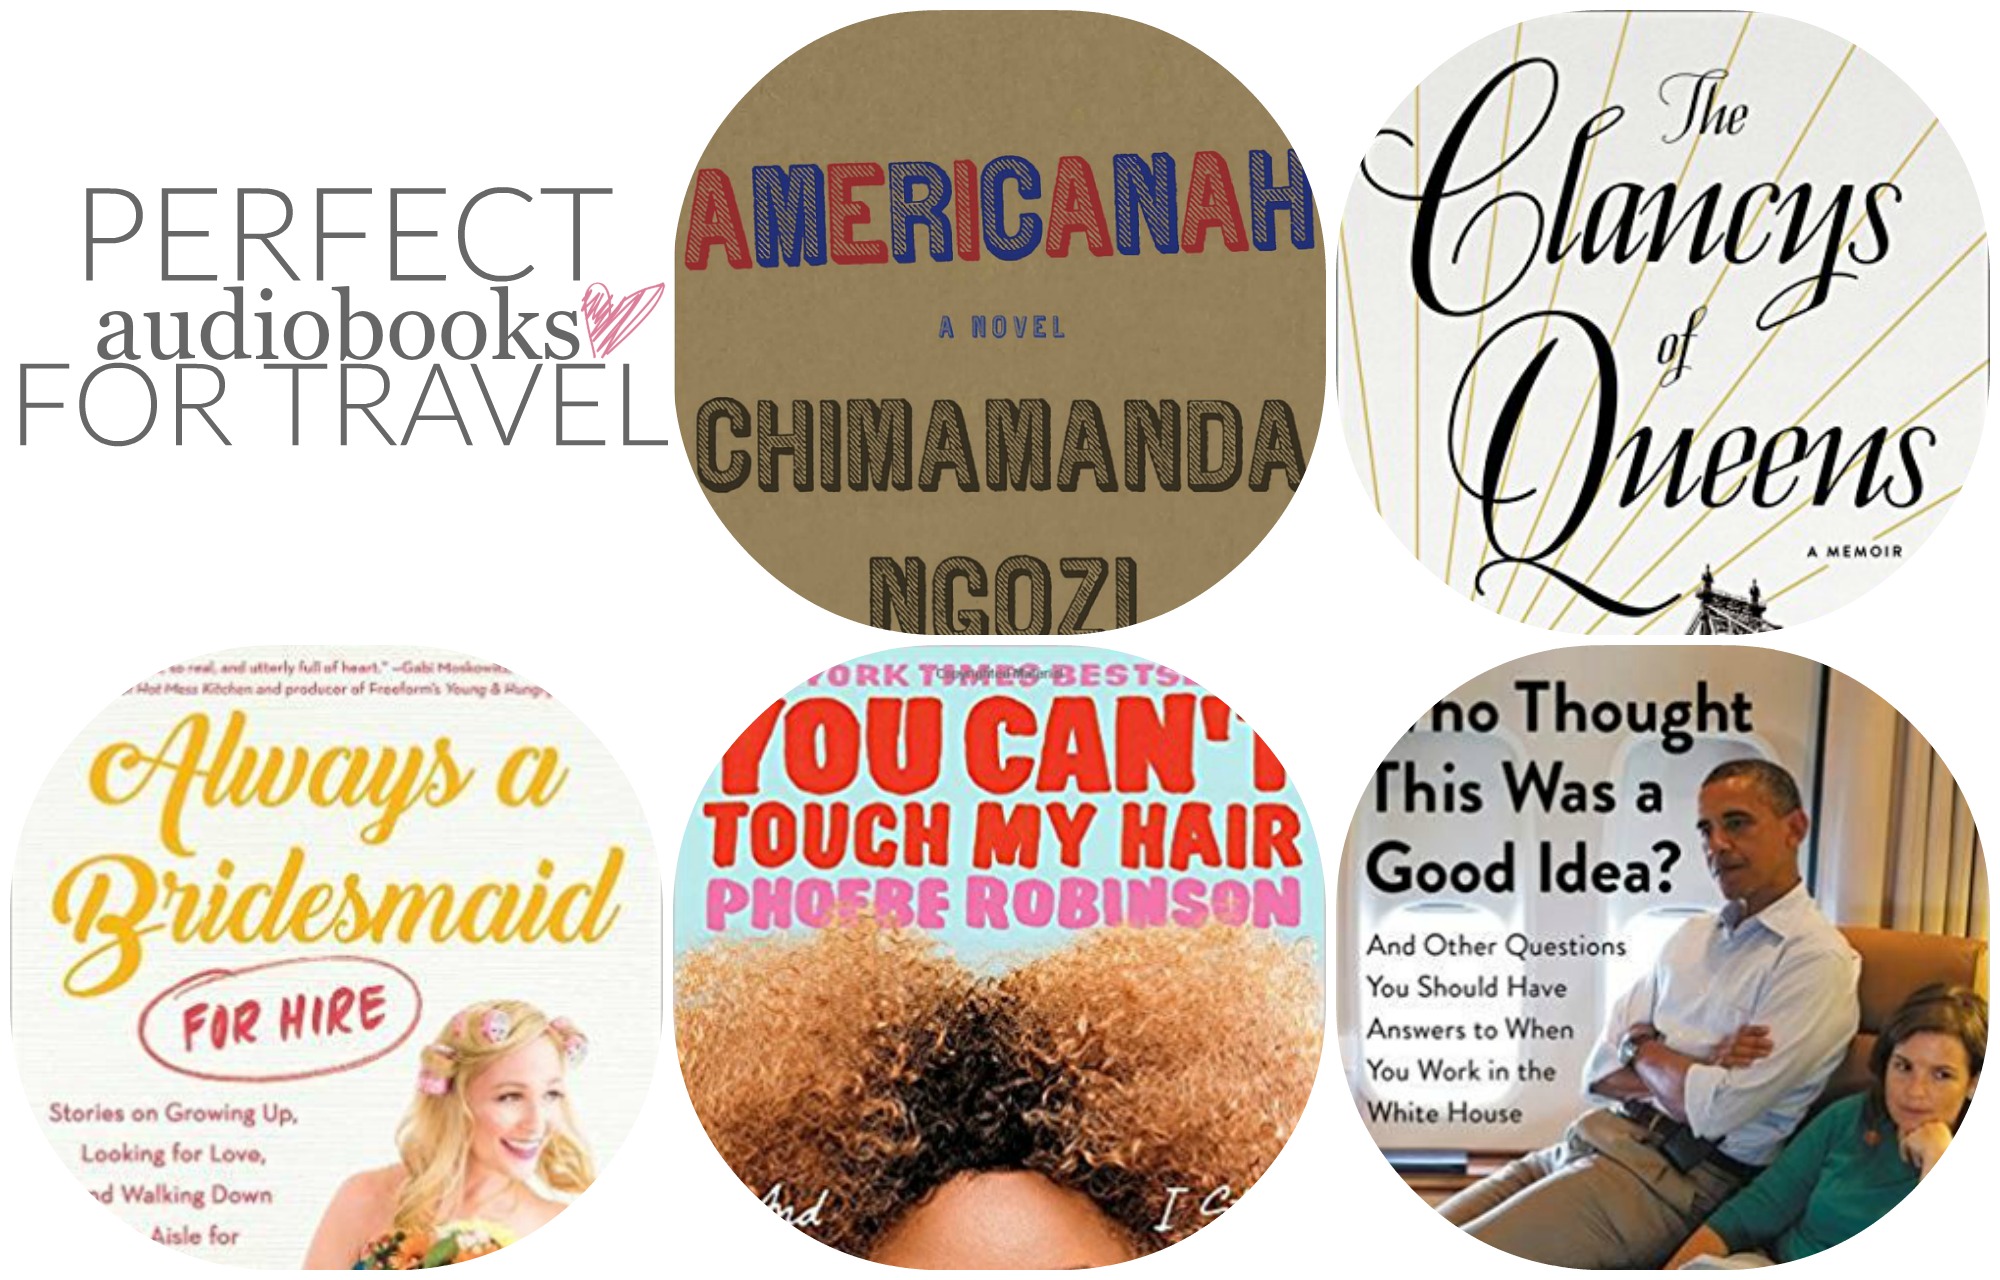 Sunday Book Club: Perfect Audiobooks for Traveling | Something Good